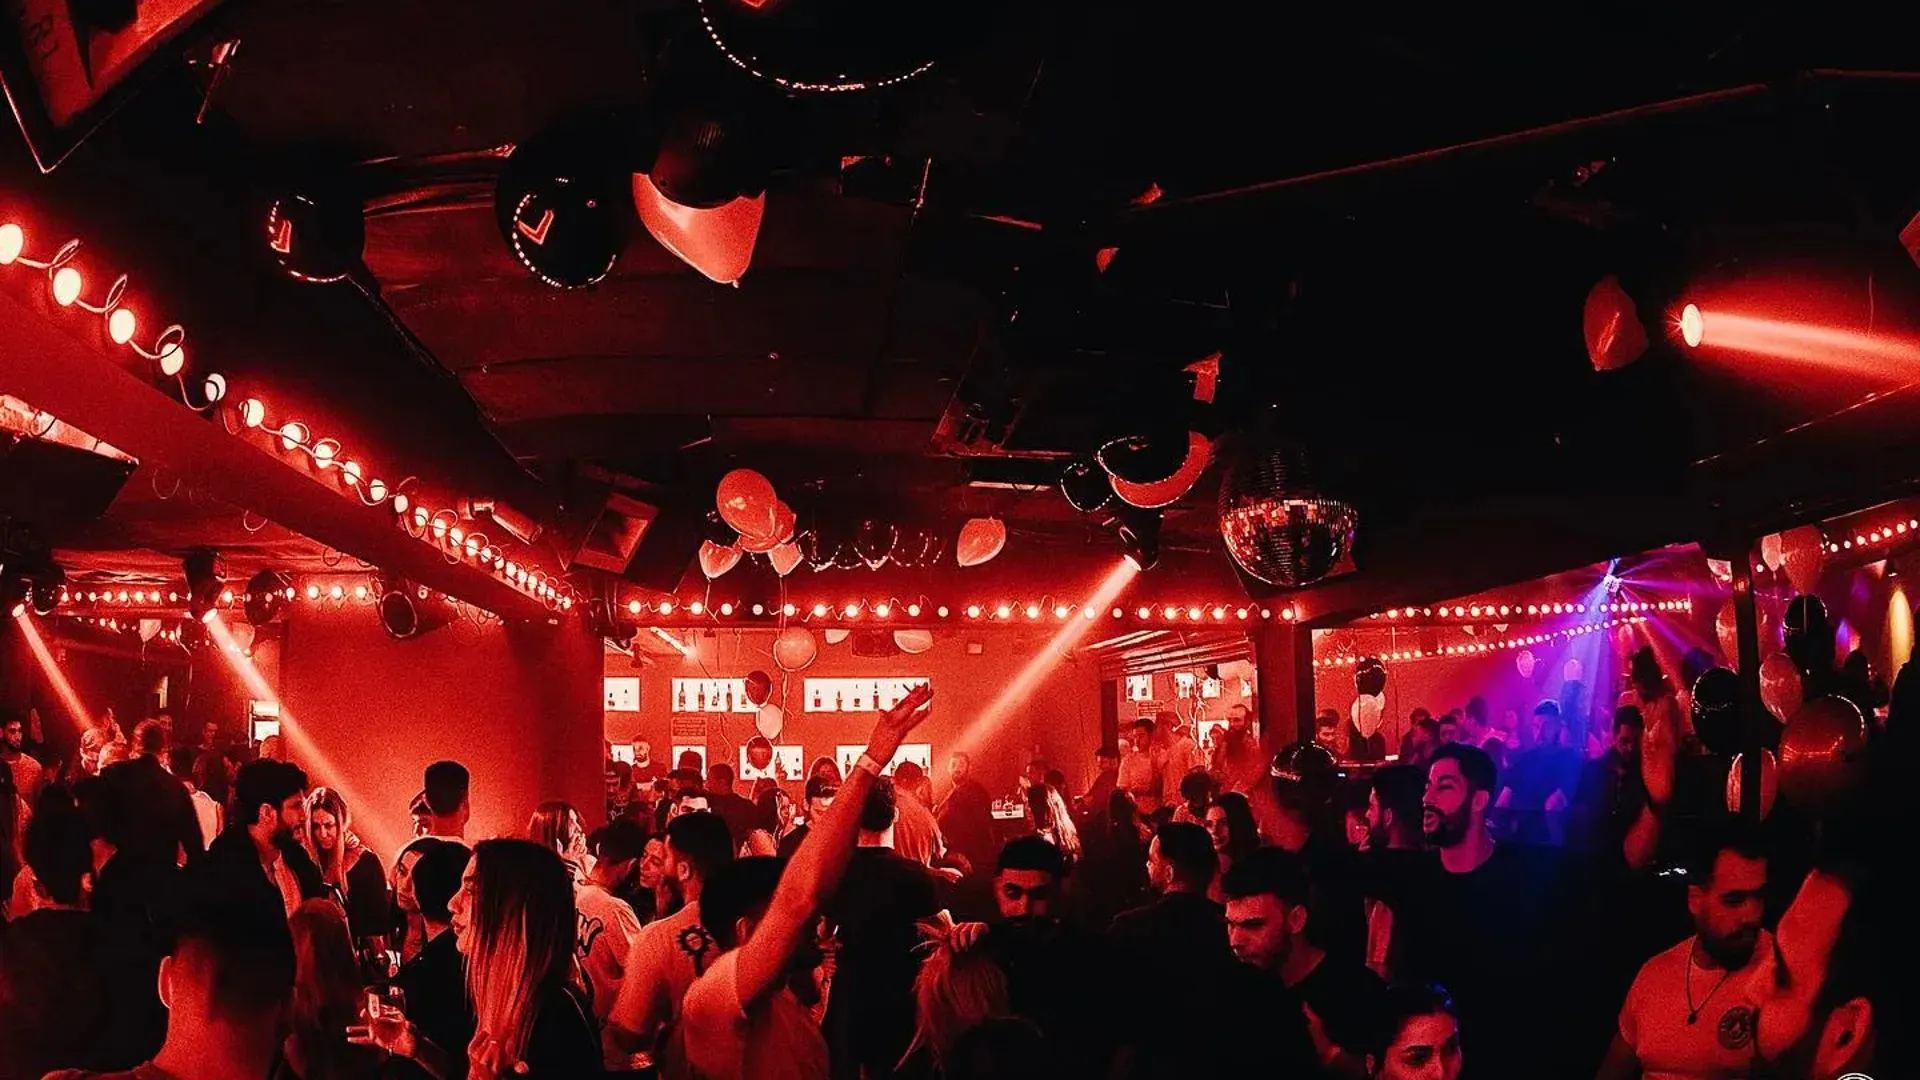 Sheket Club in Israel, Middle East | Nightclubs - Rated 0.5